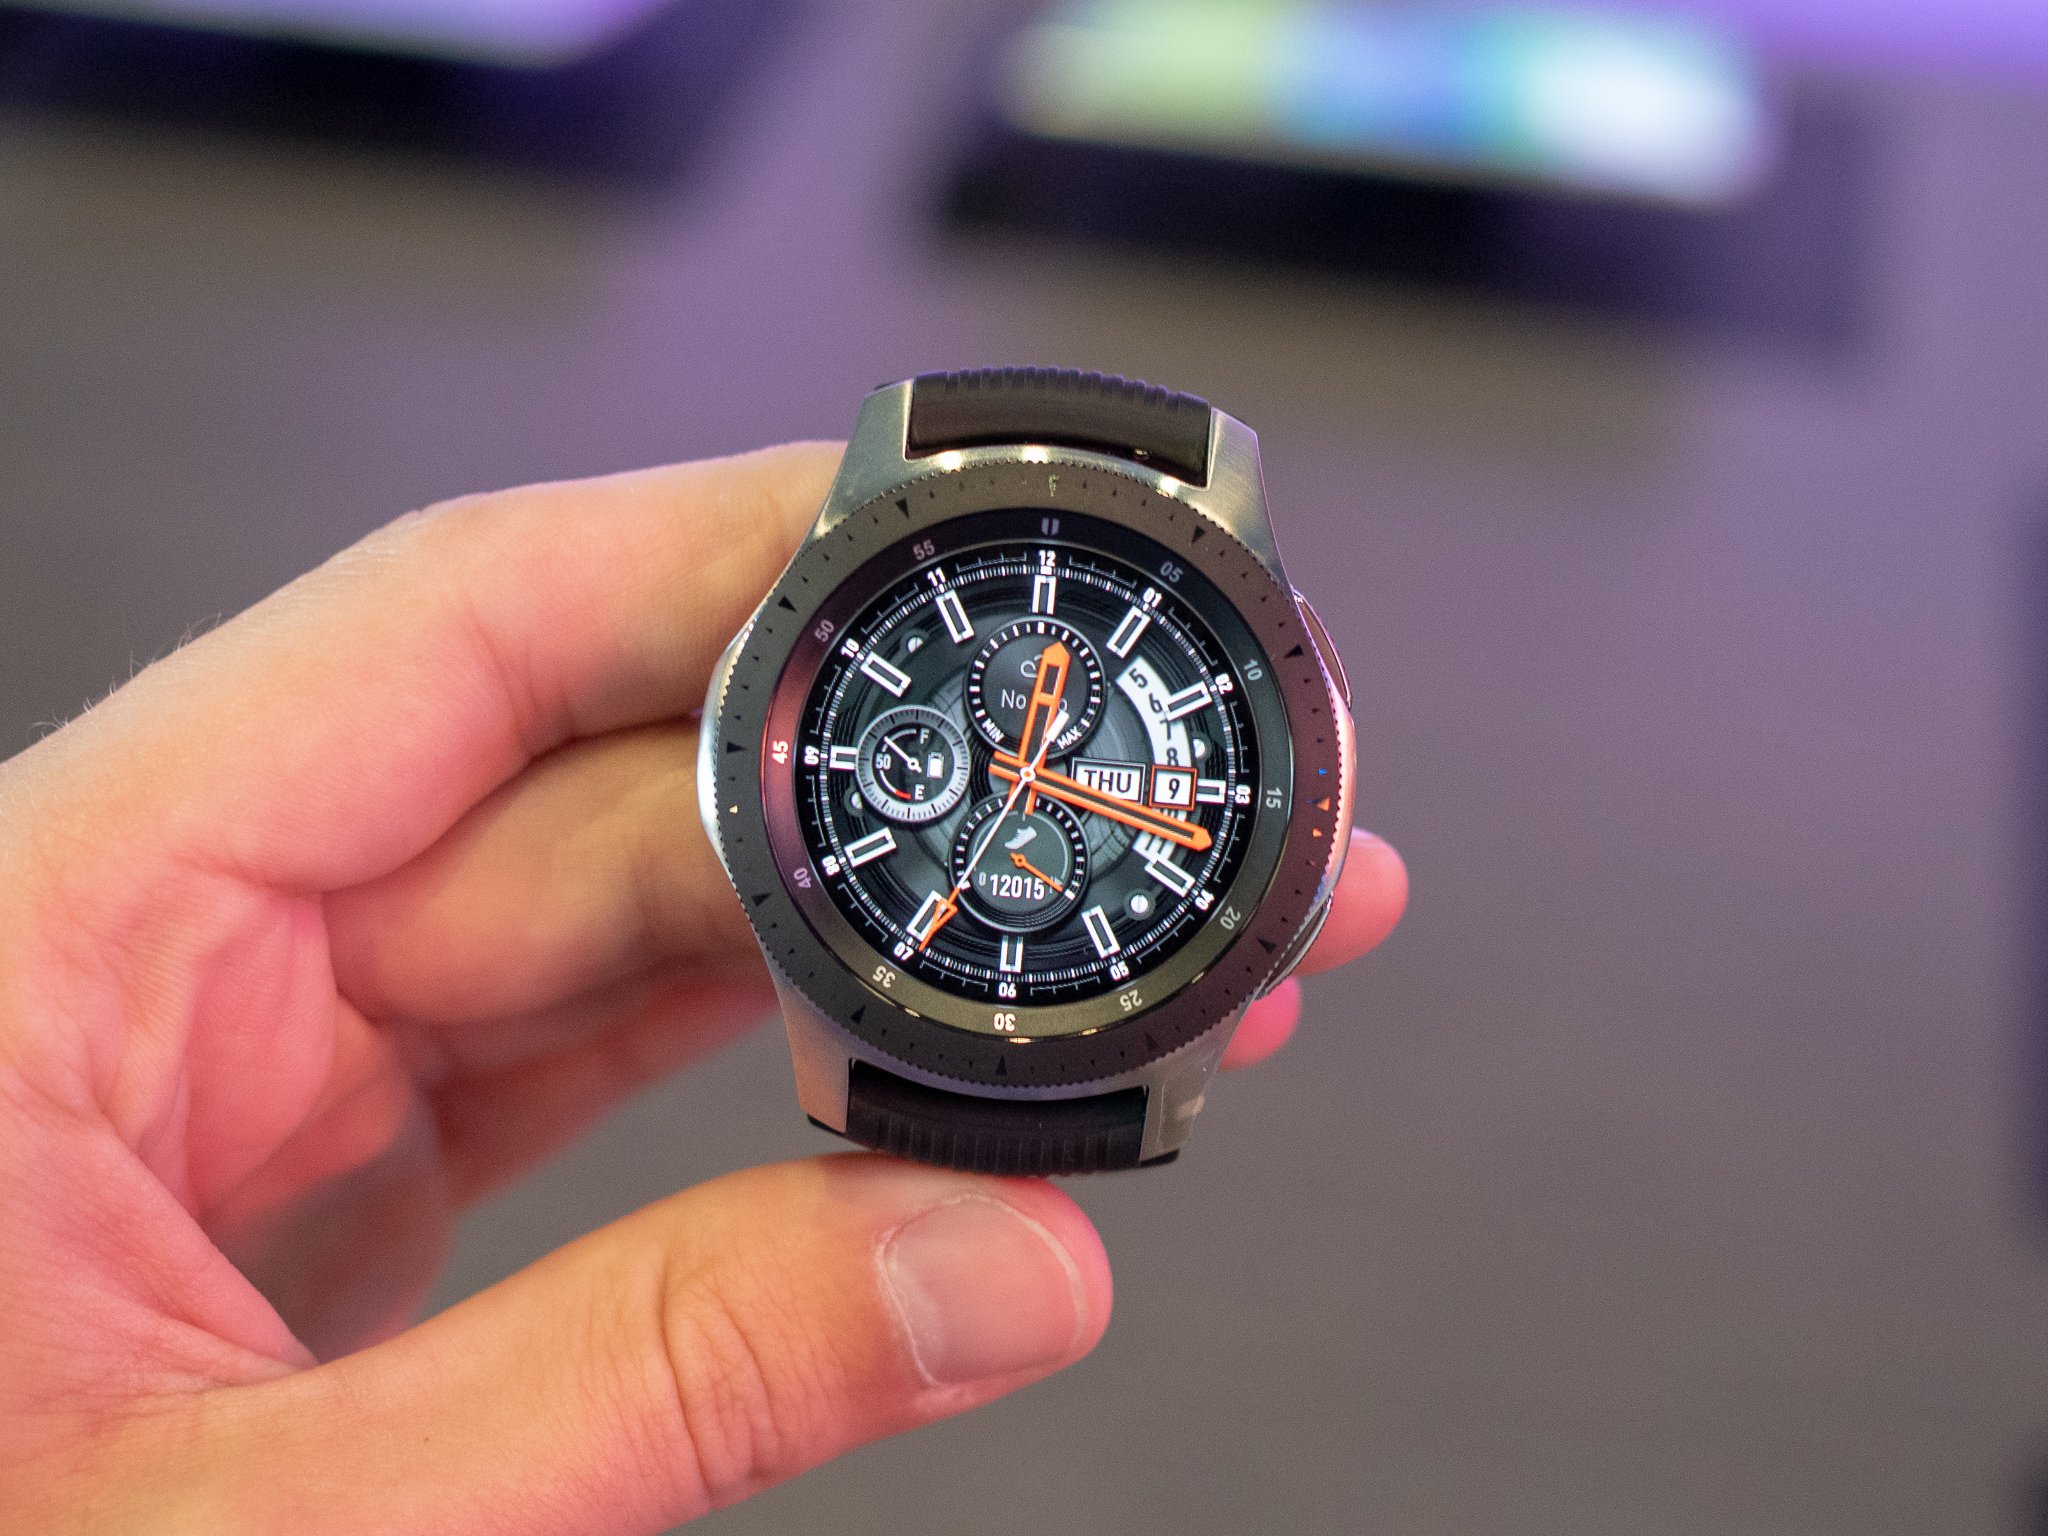 samsung s3 watch instructions manual